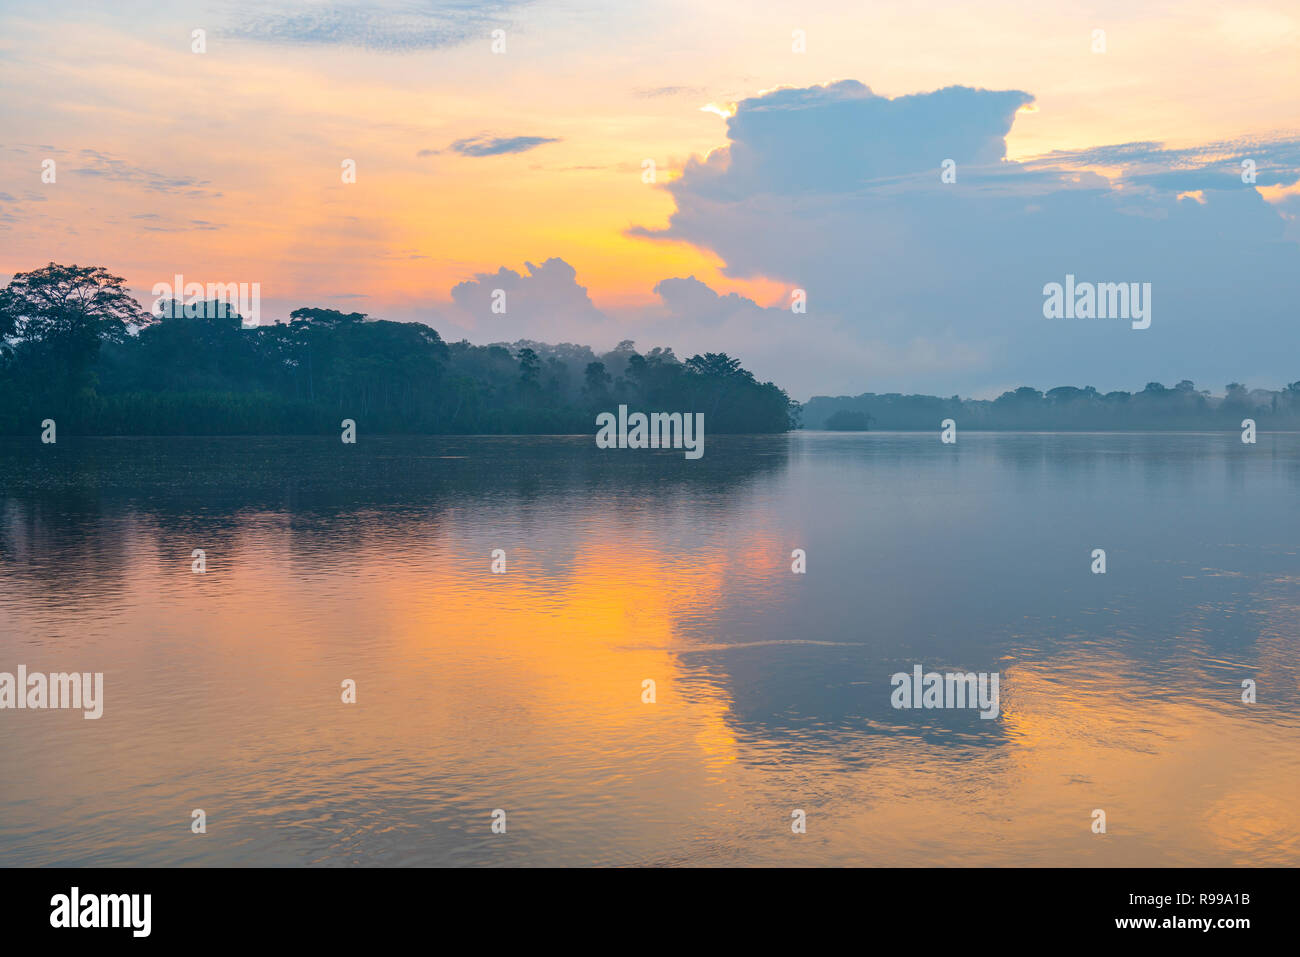 Landscape photograph of a sunset in the Amazon River Basin located in the counties of Bolivia, Ecuador, Colombia, Peru, Brazil, Venezuela and Guyana. Stock Photo